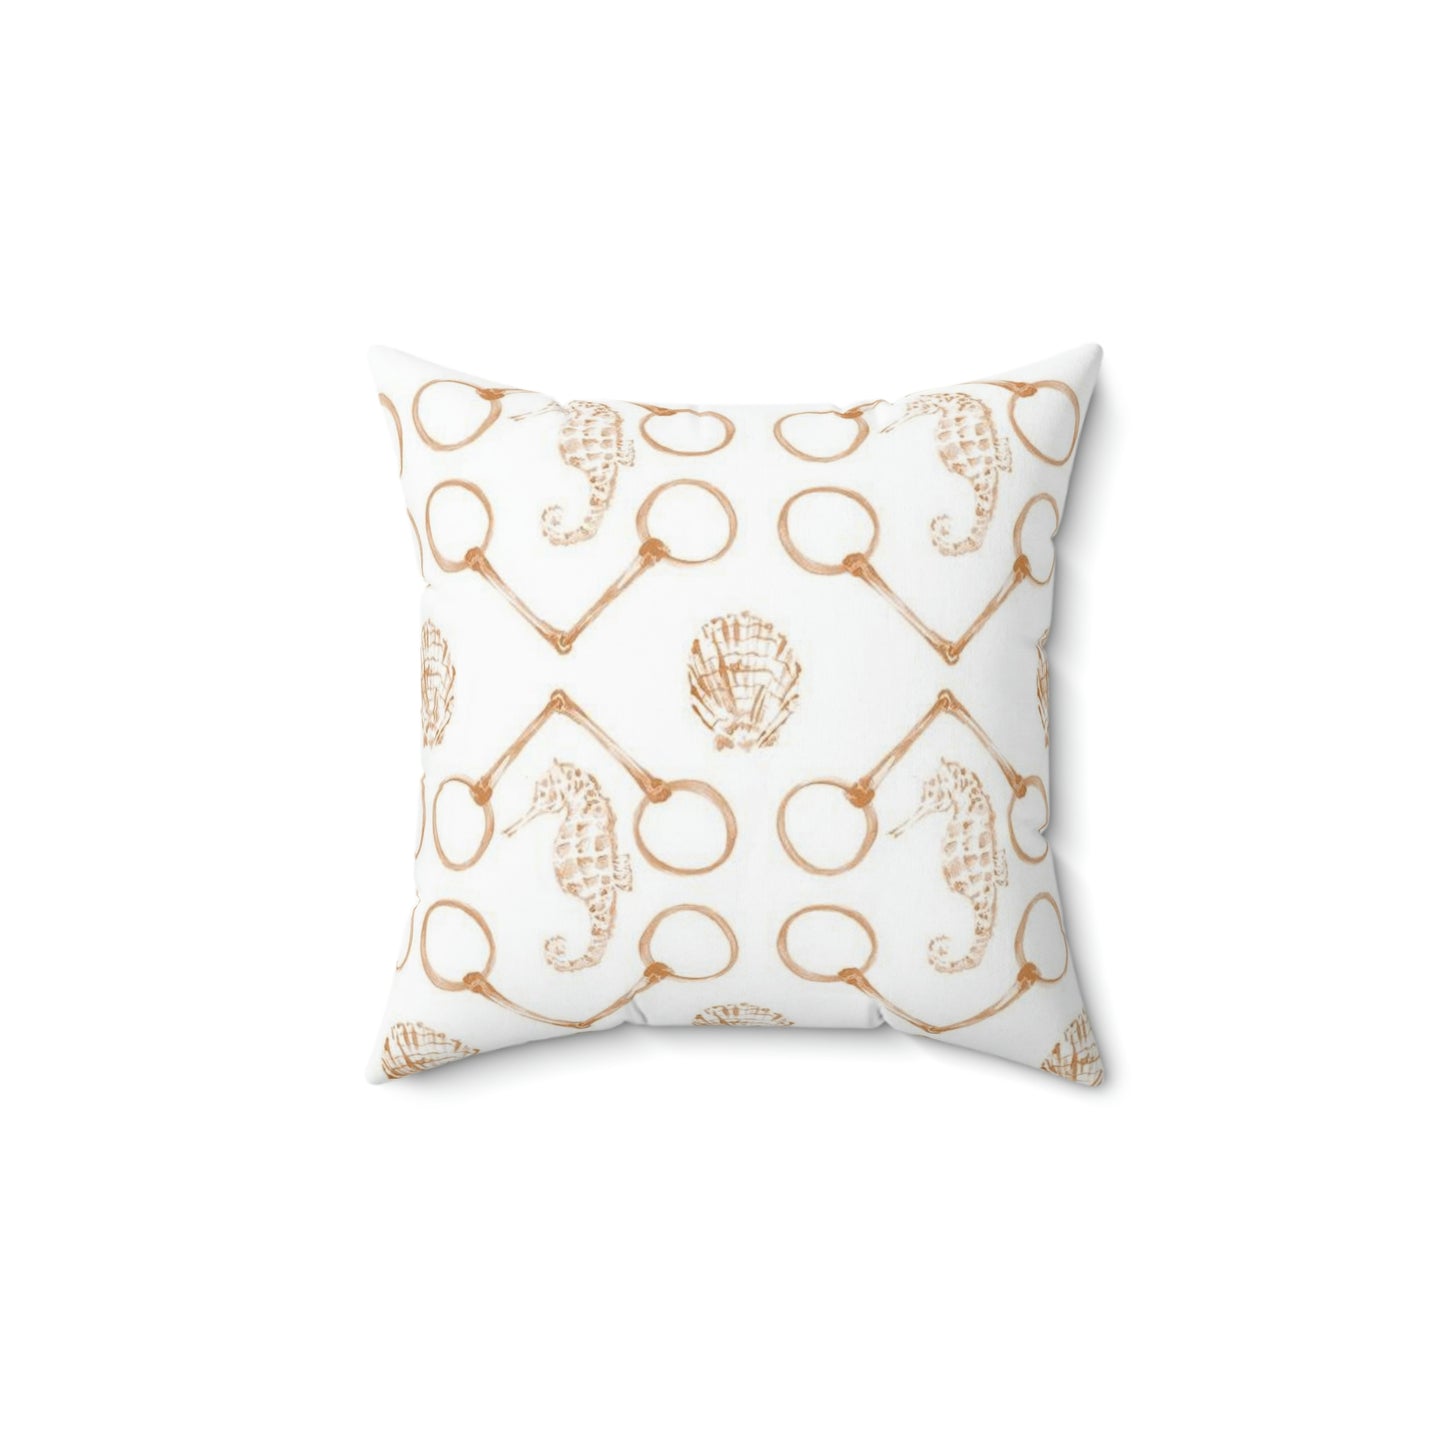 Spice Sea horse and bits Spun Polyester Square Pillow